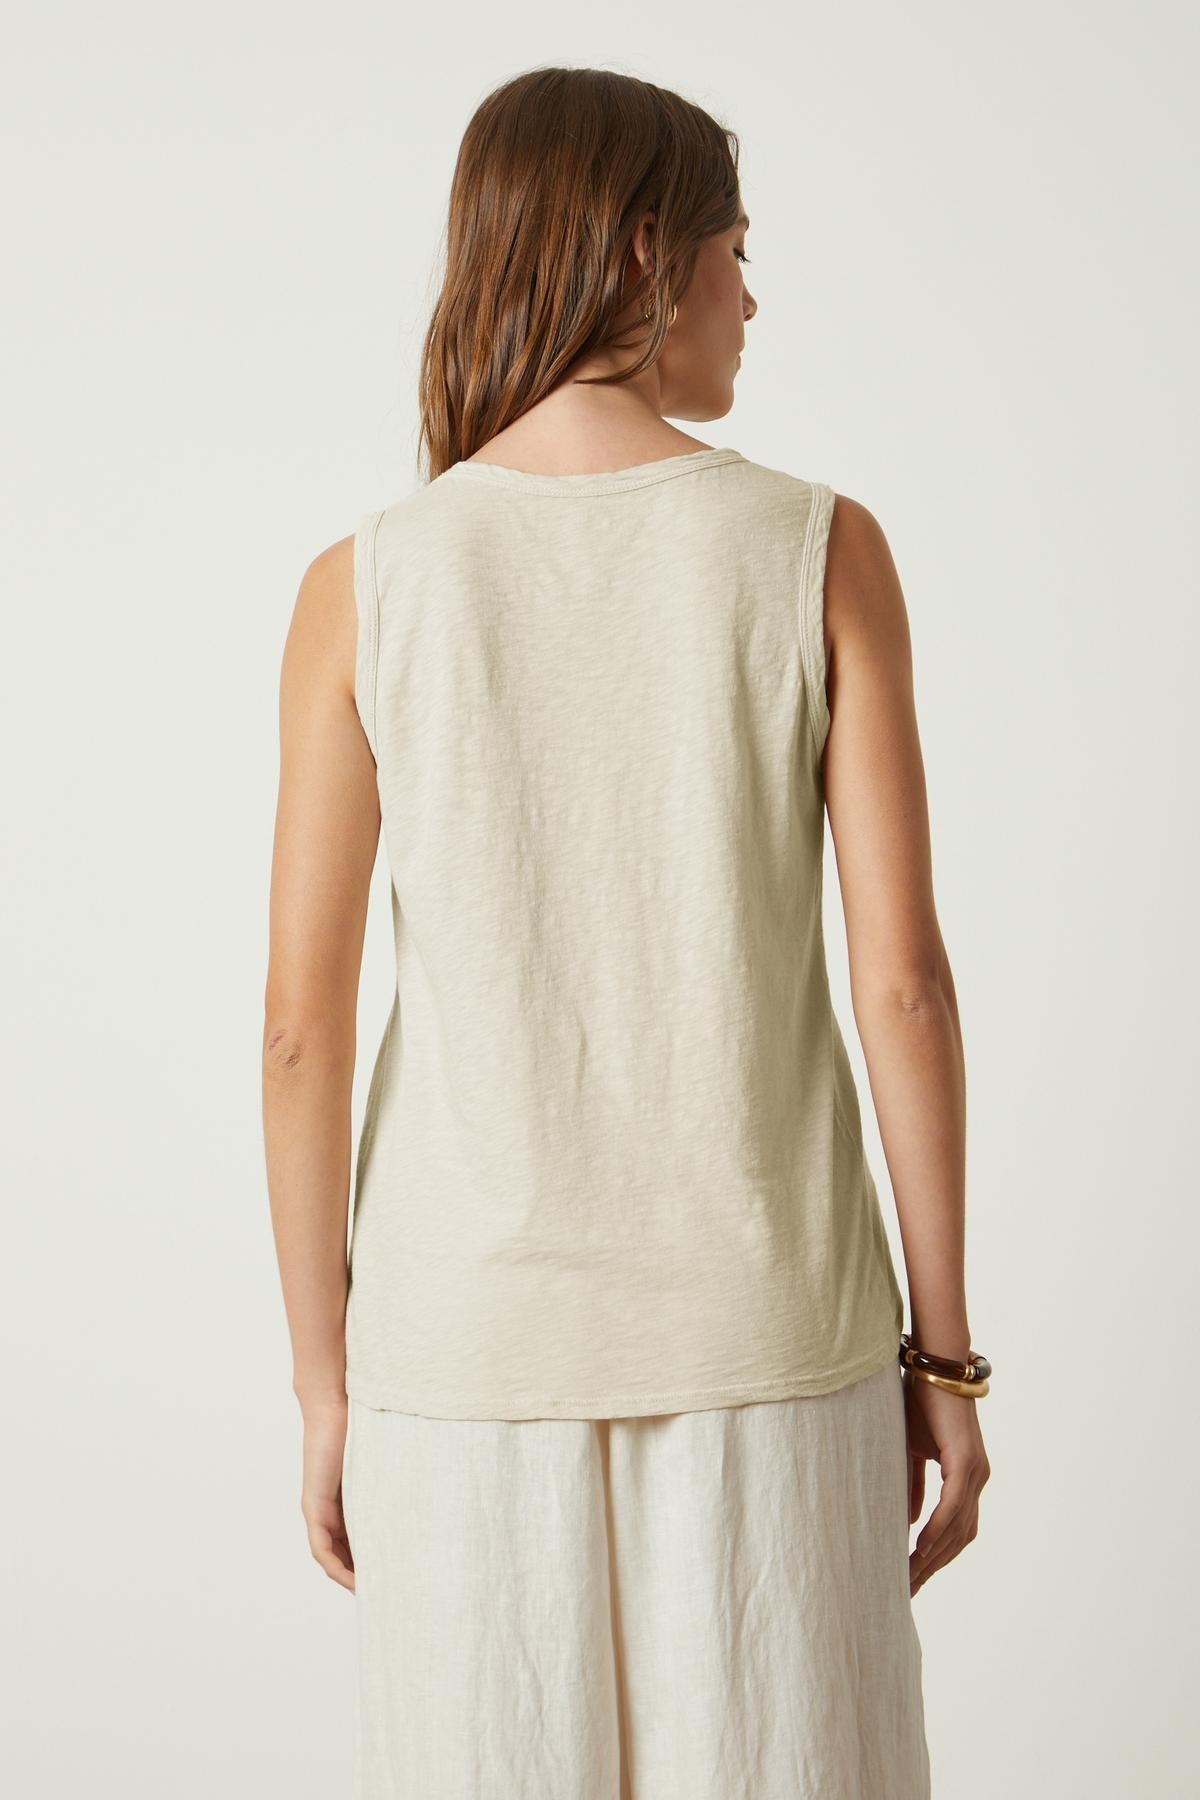 The back view of a woman wearing a Velvet by Graham & Spencer TAURUS COTTON SLUB TANK in beige.-35567717777601